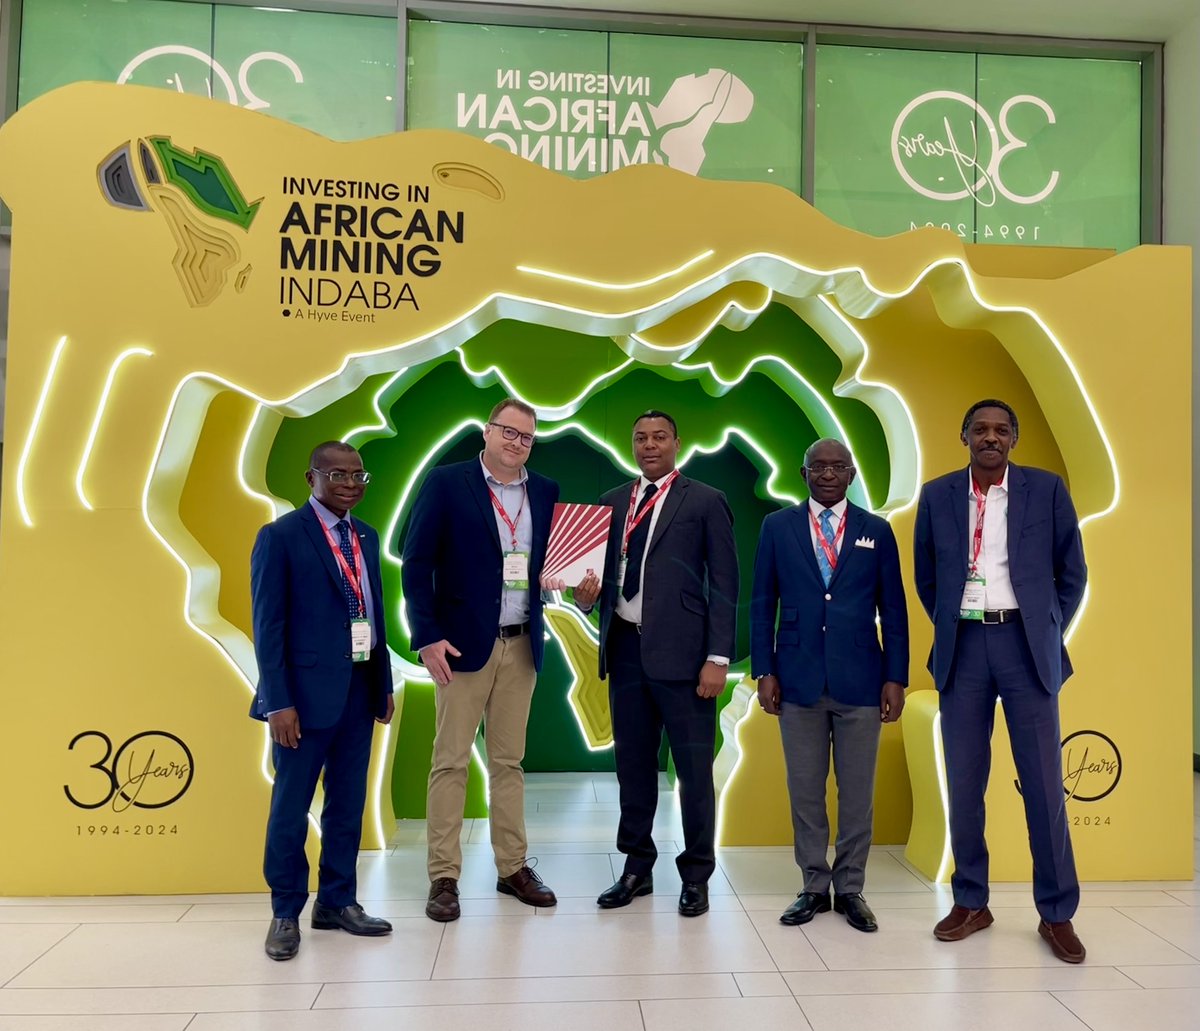 #menar signed an MOU with Société Equatoriale des Mines (SEM), the Gabonese state-owned mining company, at the #MiningIndaba today. The partnership aligns with Menar’s diversification strategy and will allow discussions on possible investment opportunities in the Gabonese mining…